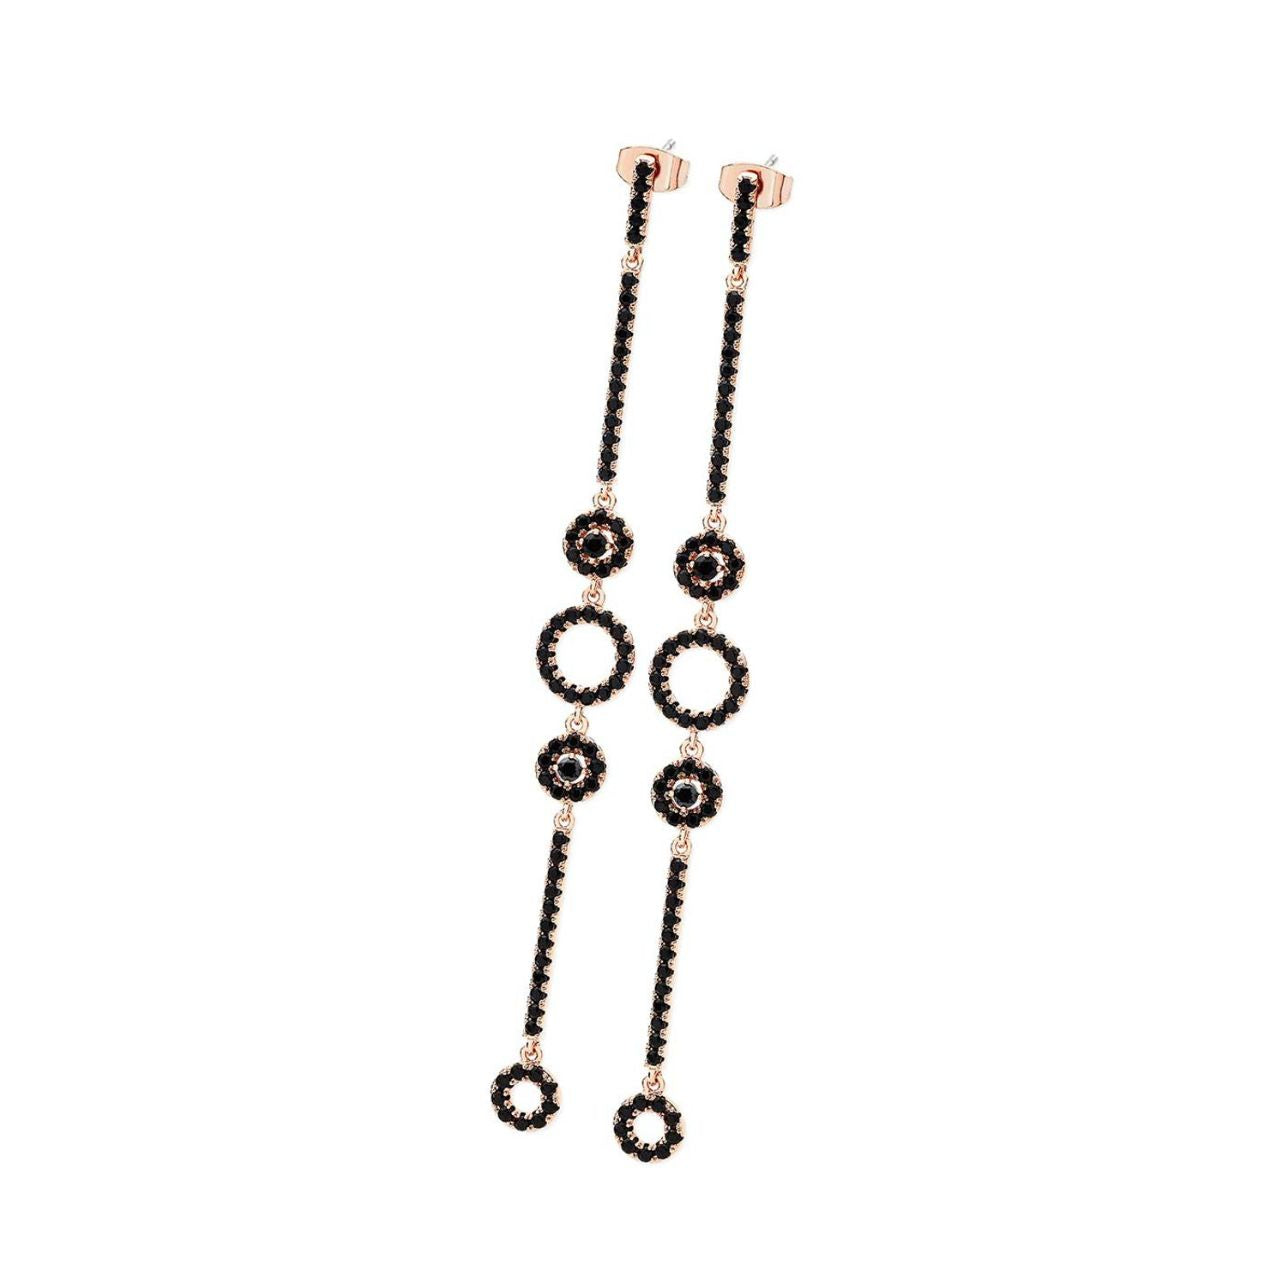 Tipperary Crystal Noir Rose Gold Hoop & Stem Drop Earrings  These exquisite drop earrings can be worn on a night out or to dress up casual wear. Fashioned in rose gold these art deco drop earnings are adorned with smouldering back crystals and secure comfortably with push backs.